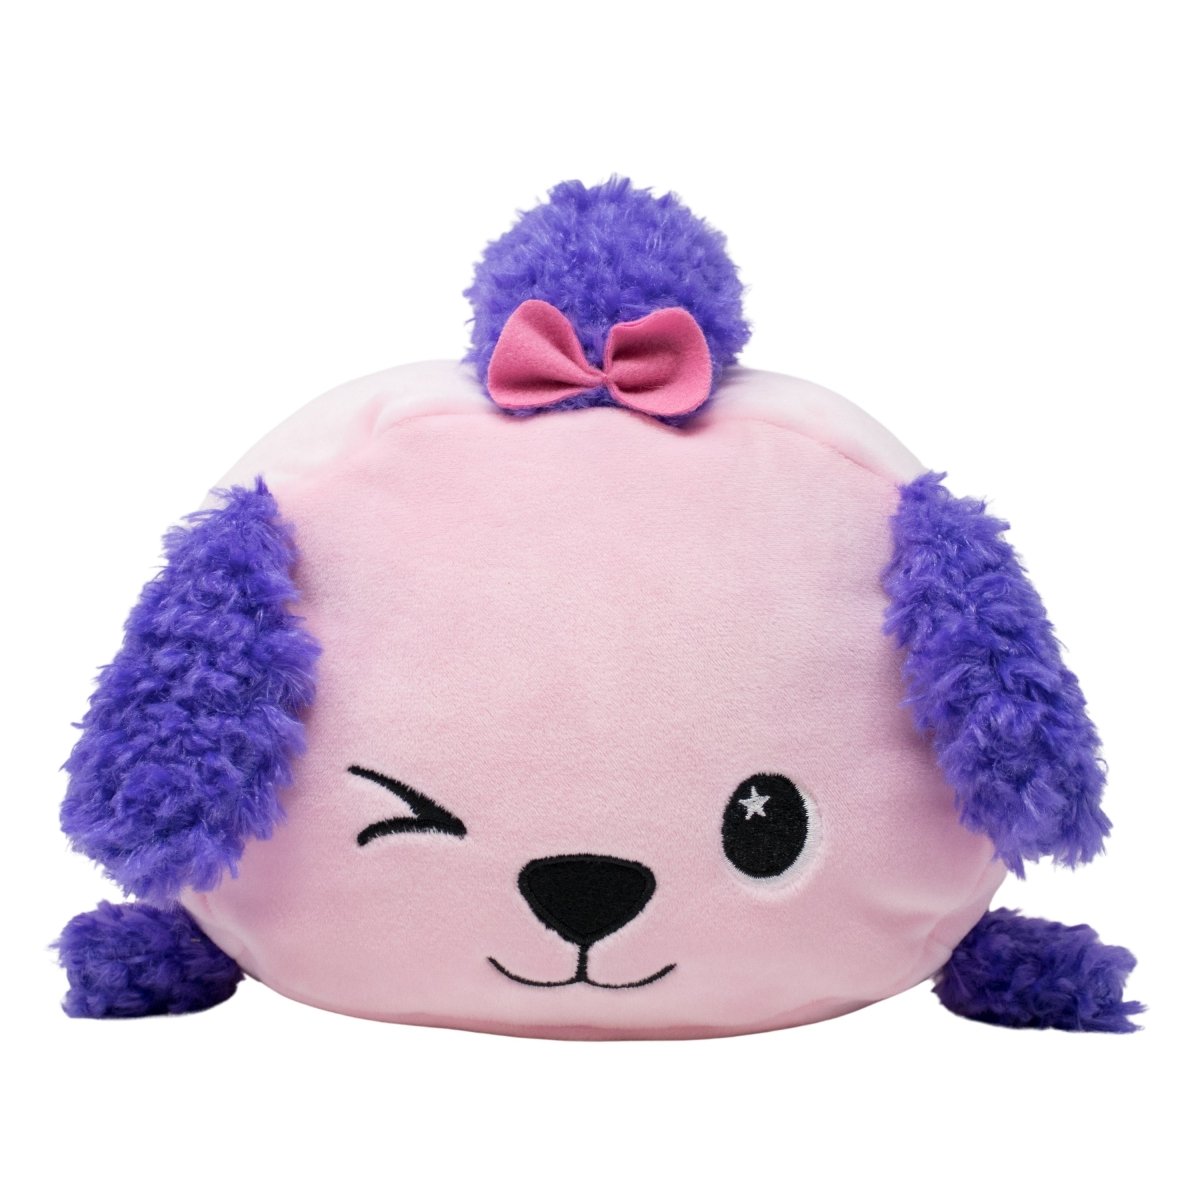 Pink Poodle Stuffed Animal with Purple Ears and Feet